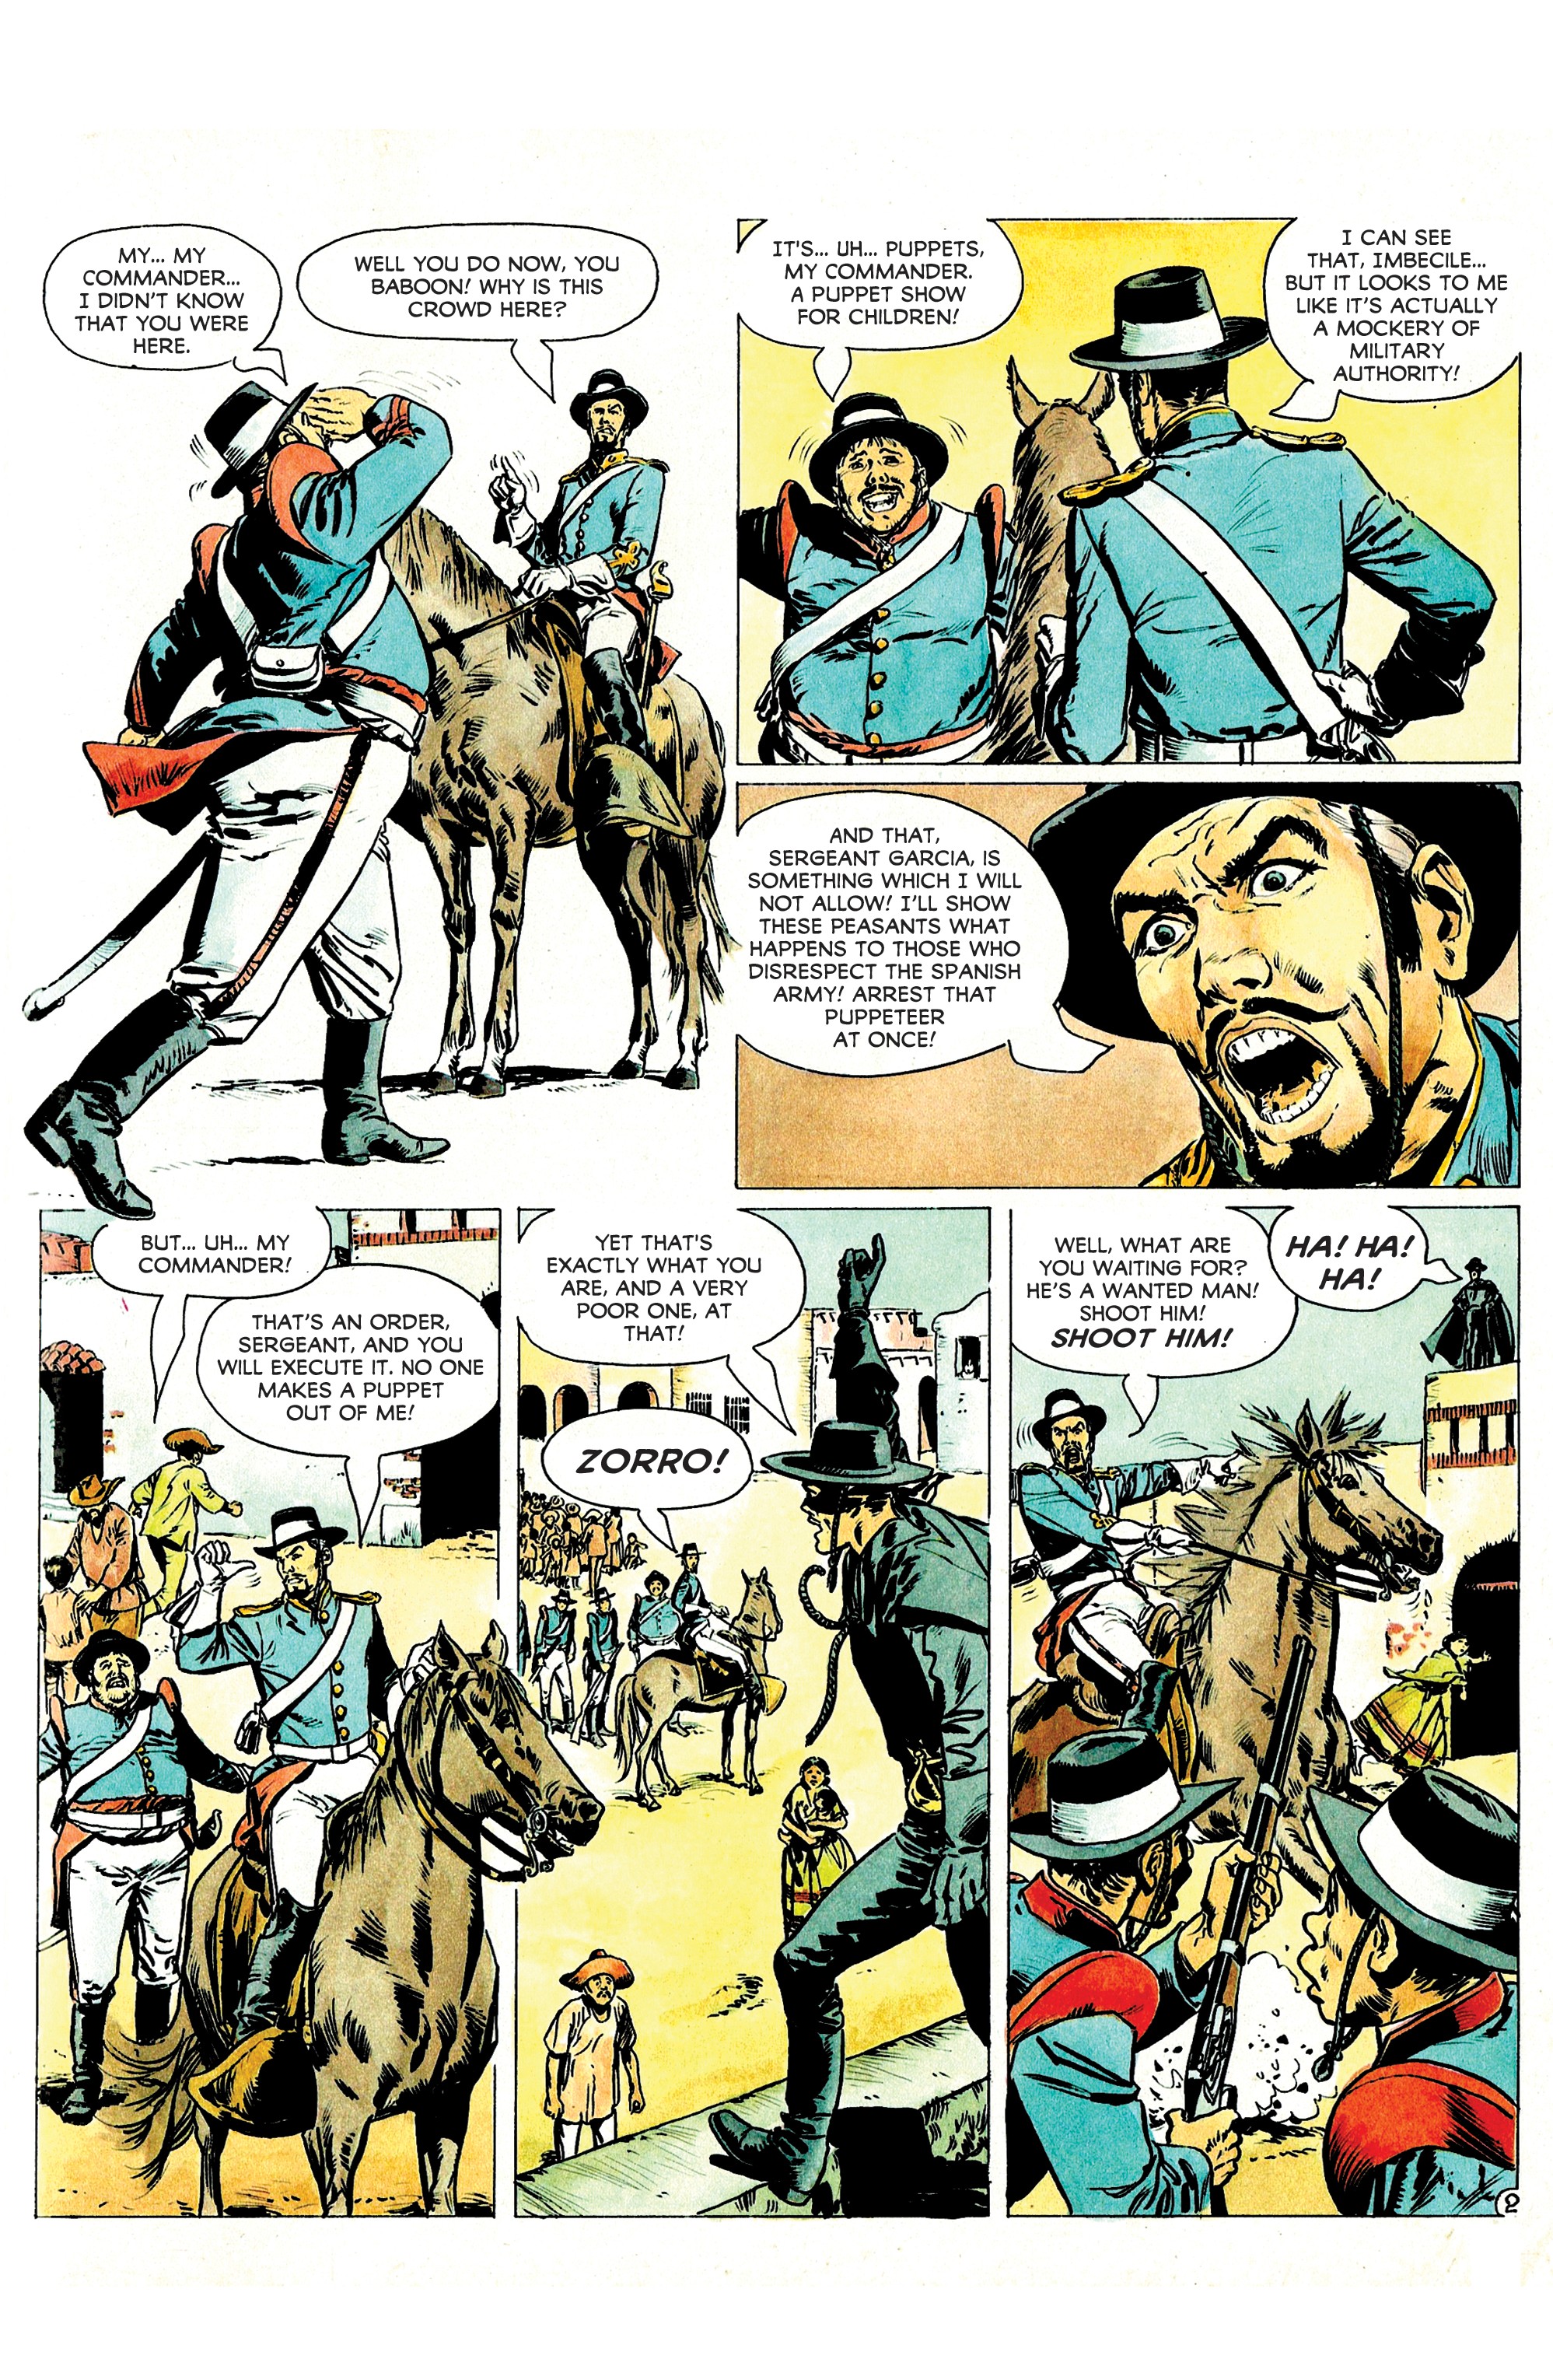 Zorro: Legendary Adventures Book 2 (2019): Chapter 1 - Page 4